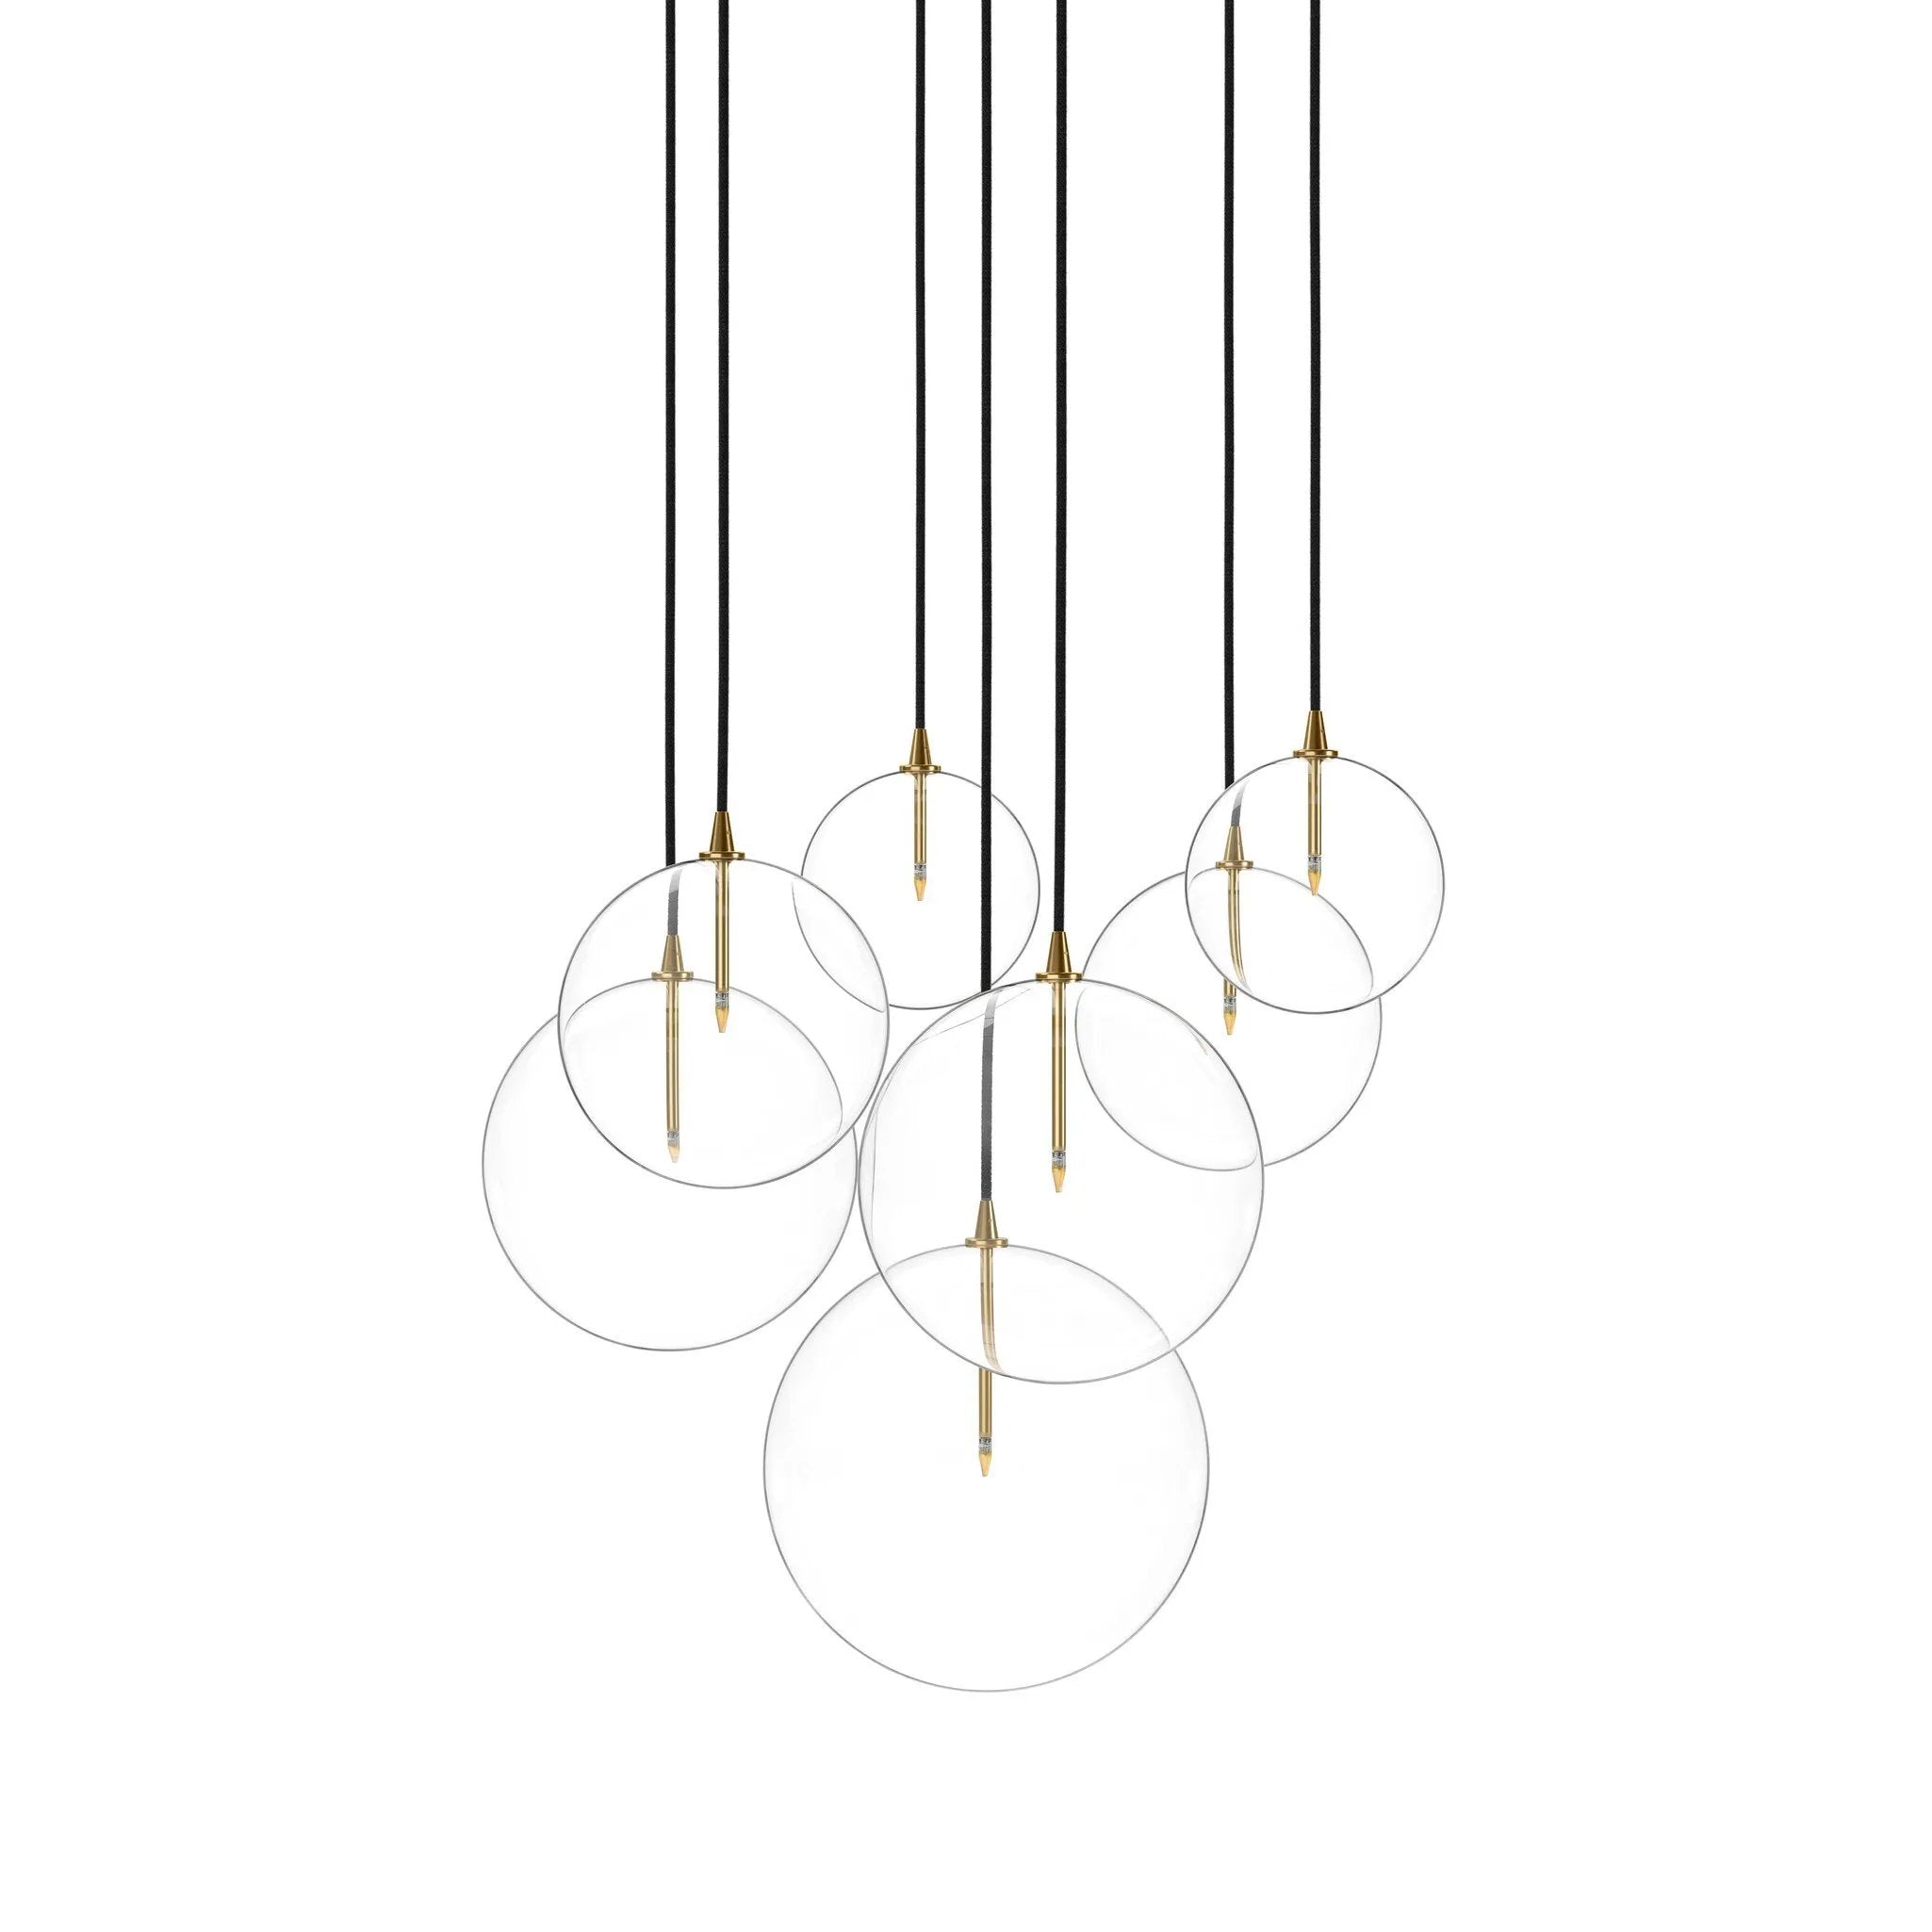 Clear glass spheres dangle at varying lengths for a stunning effect. Each globe is individually blown, shaped and sculpted by hand through a one-hour process. Brass and glass are 98% recyclable. Designed and sustainably crafted in Poland by Schwung.Overall Dimensions29.00"w x 30.75"d x 32.25"hFull Details &amp; SpecificationsTear Shee Amethyst Home provides interior design, new home construction design consulting, vintage area rugs, and lighting in the Nashville metro area.